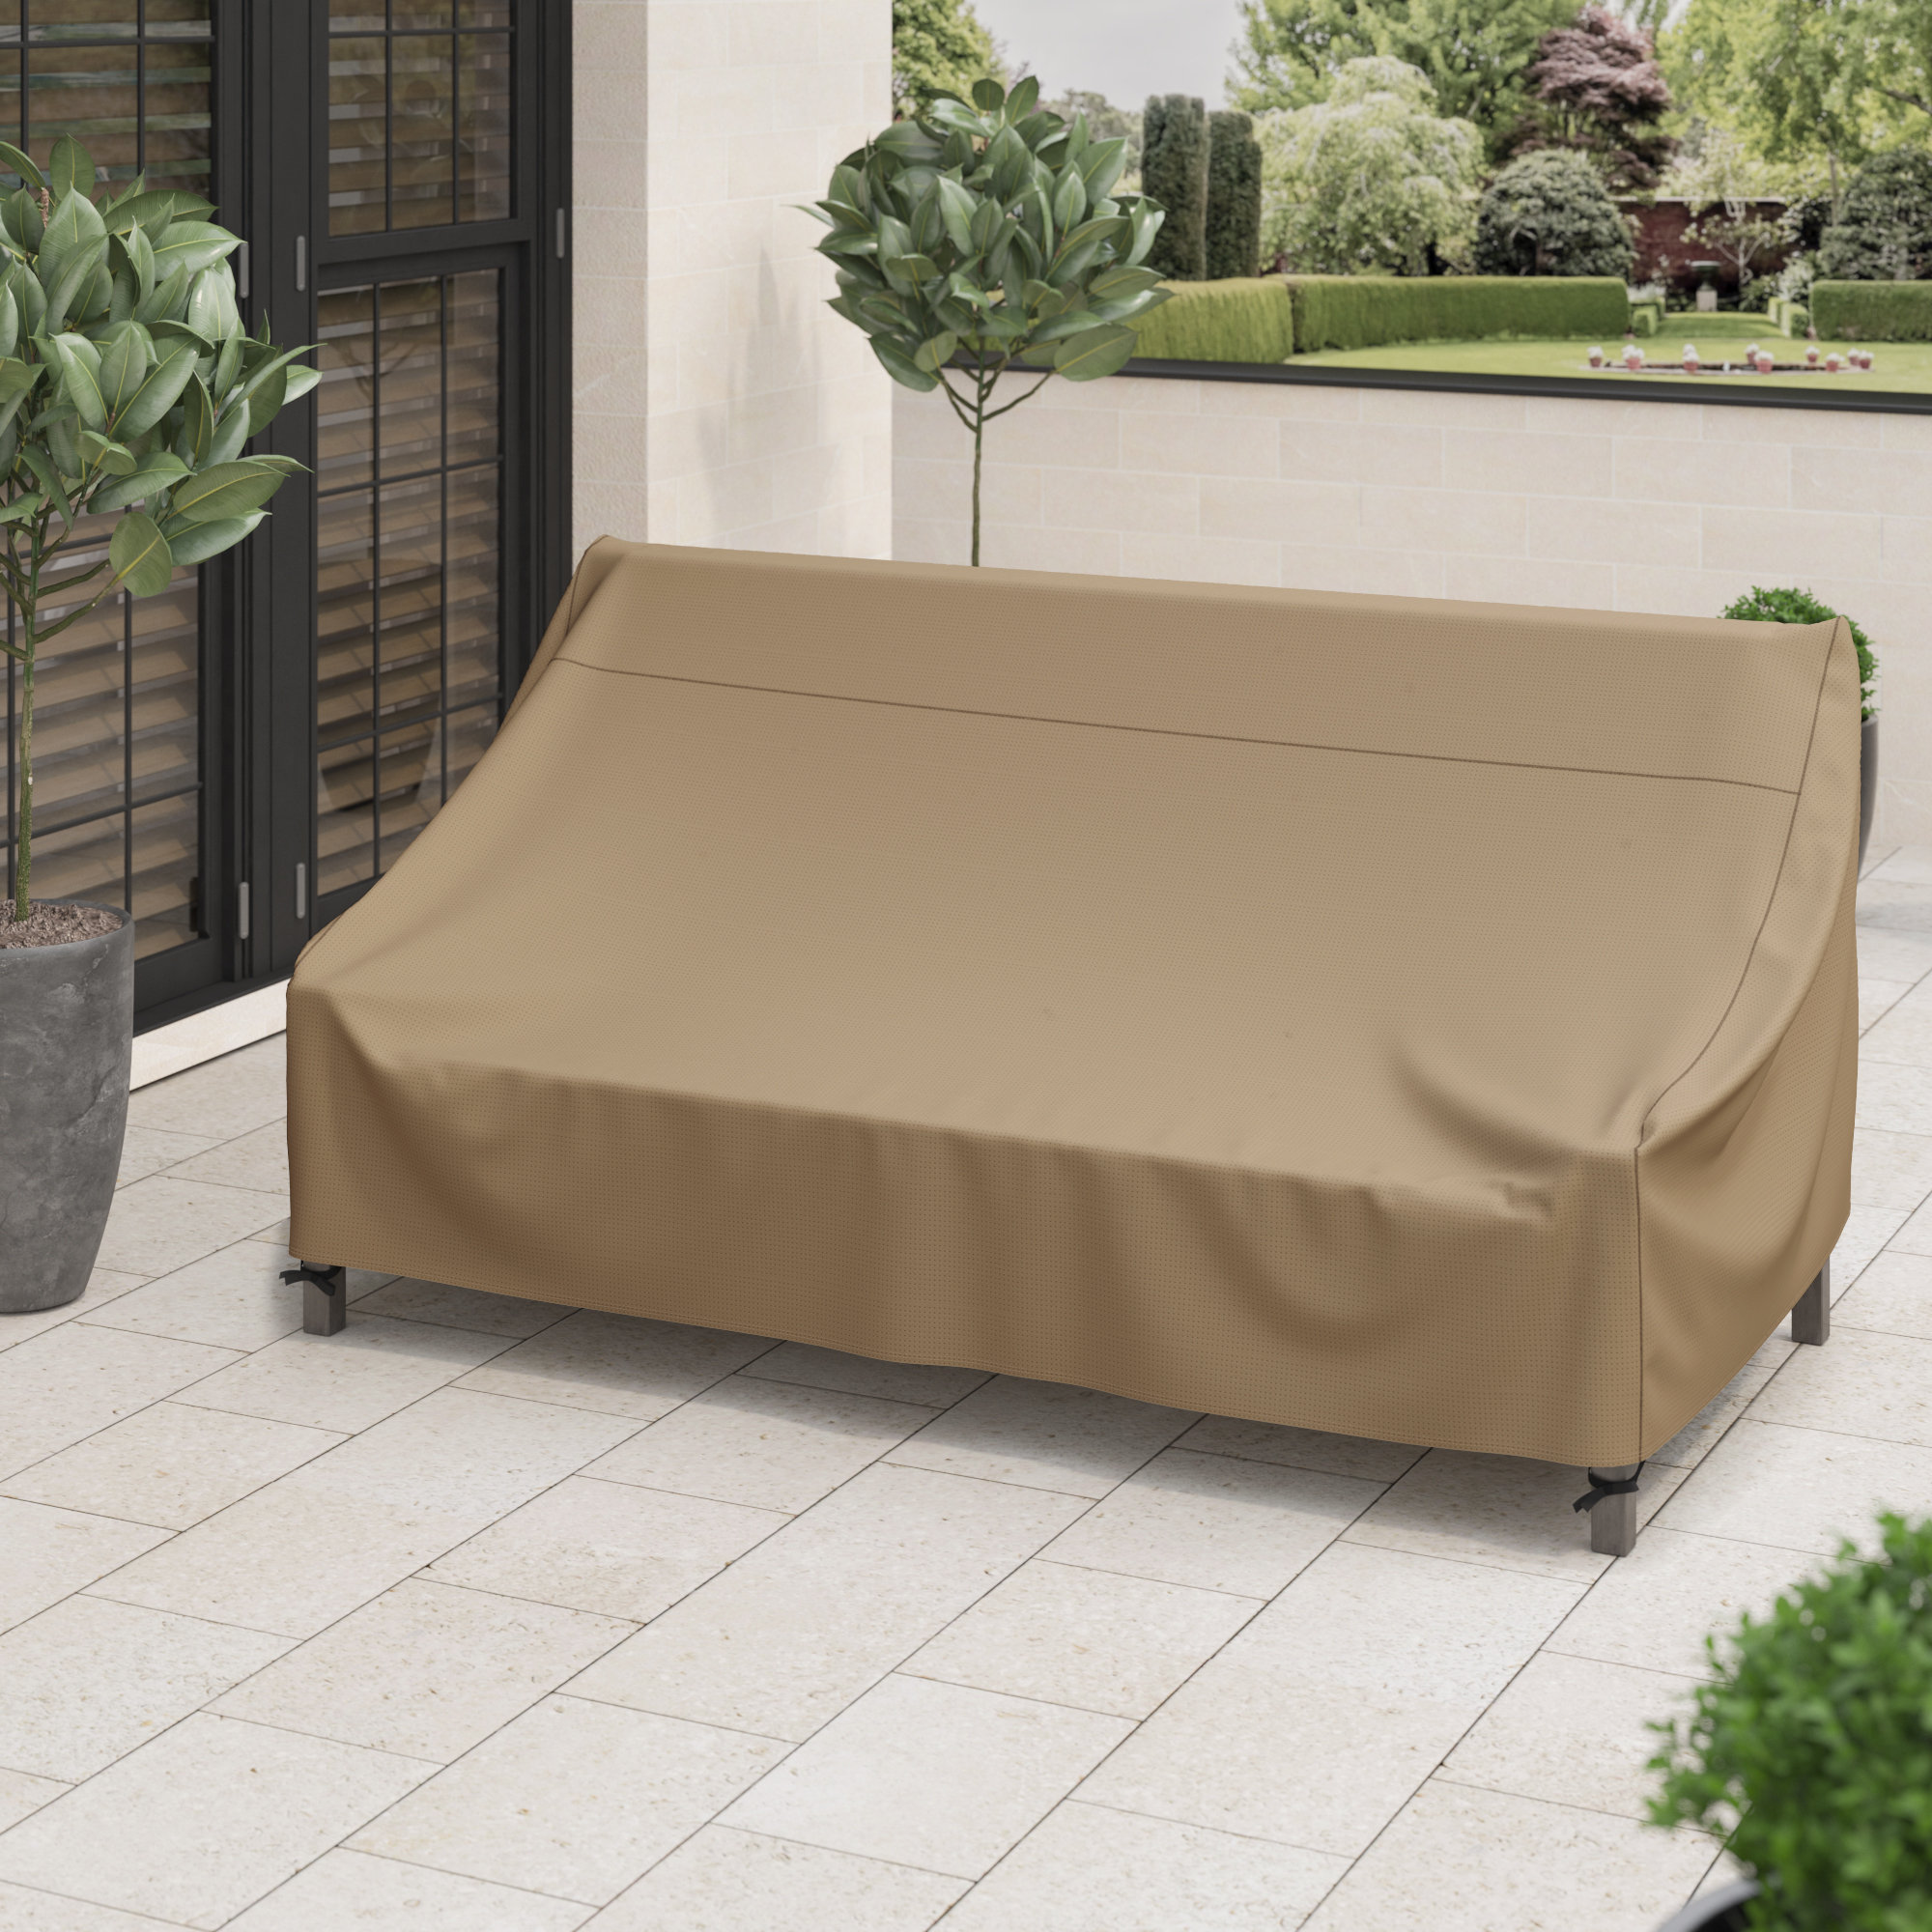 Duck Covers Elegant Water-Resistant 52 Inch Rectangular Patio Ottoman/Side Table Cover 